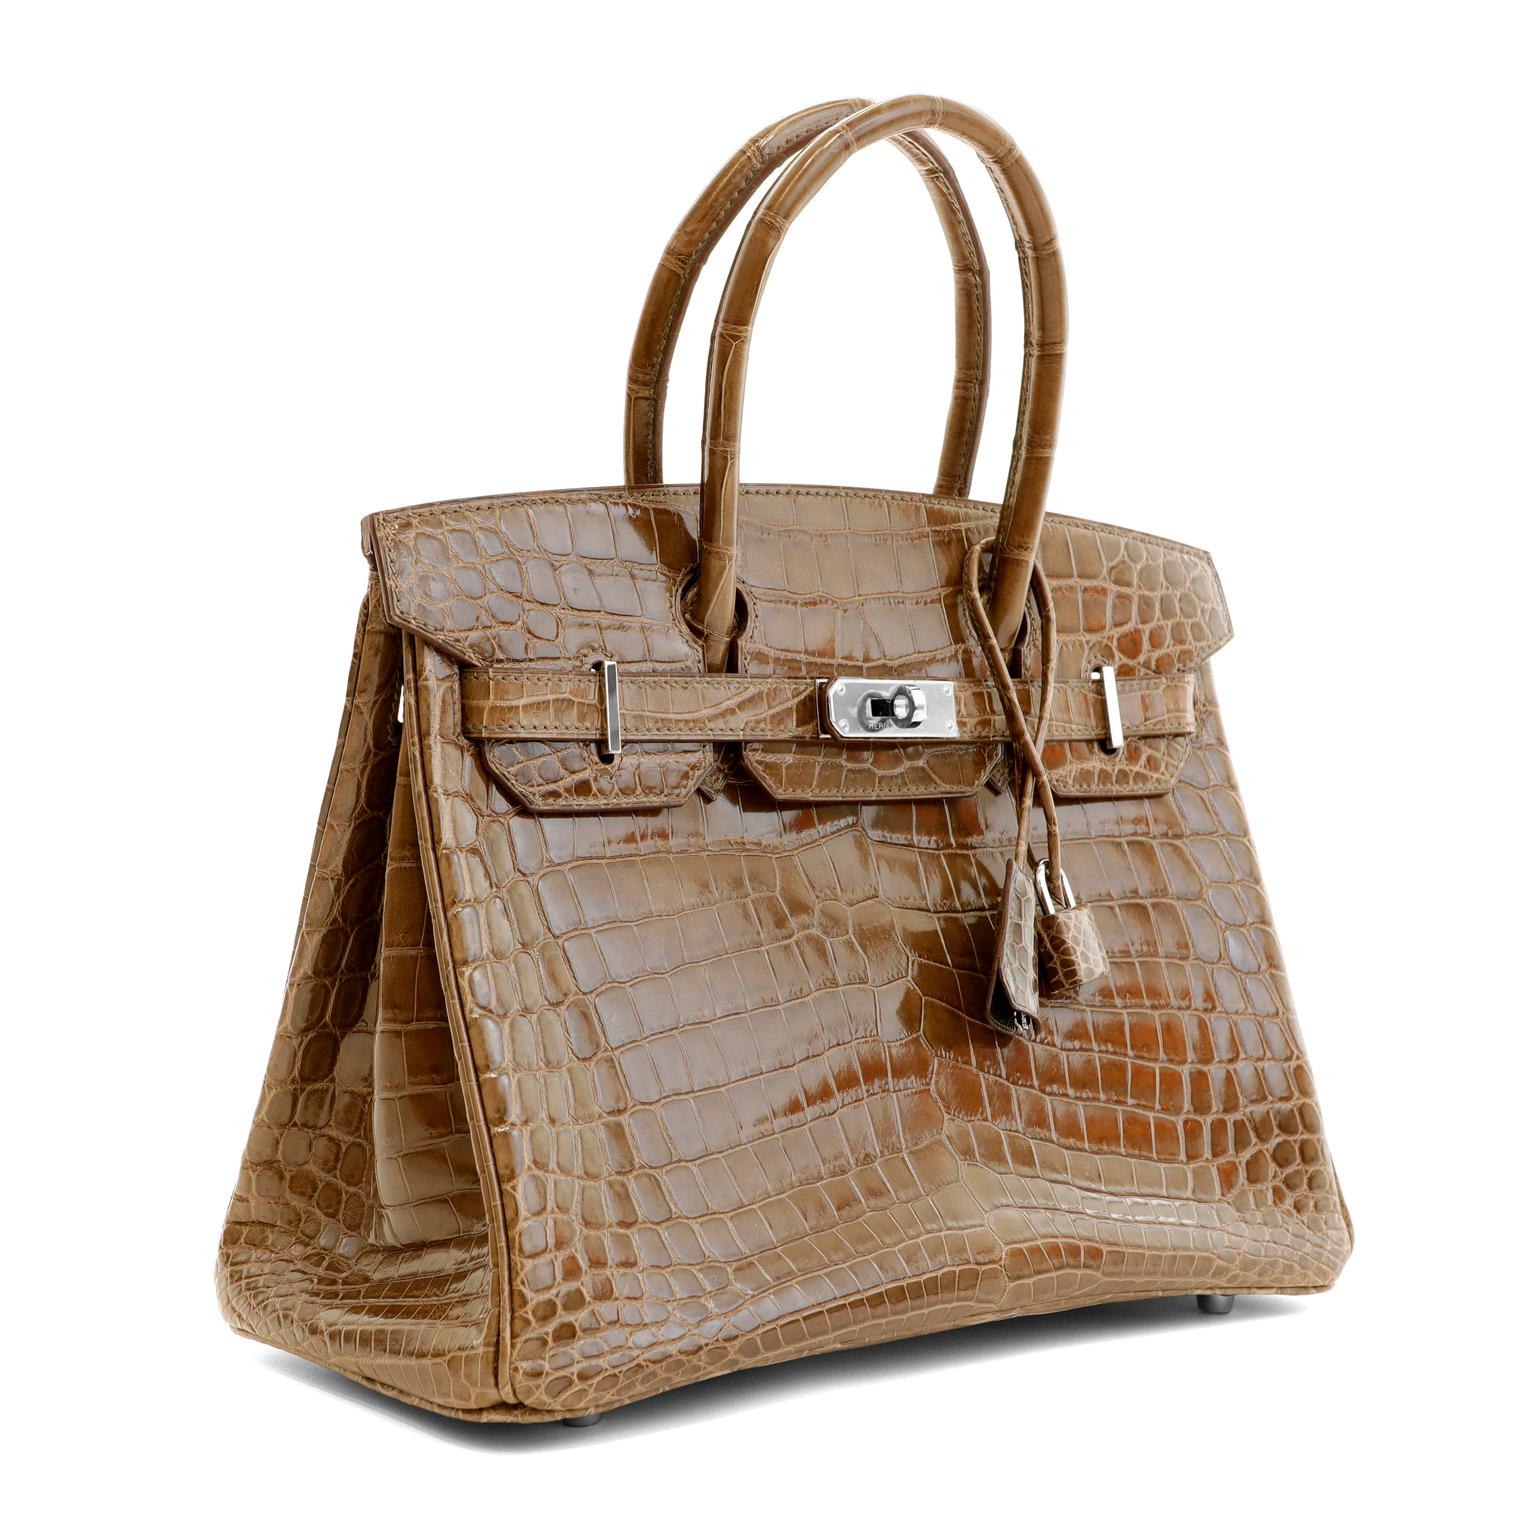 This authentic Hermès 30 cm Gris Elephant Crocodile Birkin is in pristine unworn condition, never before carried.  The protective plastic is intact on the hardware and it has been meticulously stored.   Hermès bags are considered the ultimate luxury